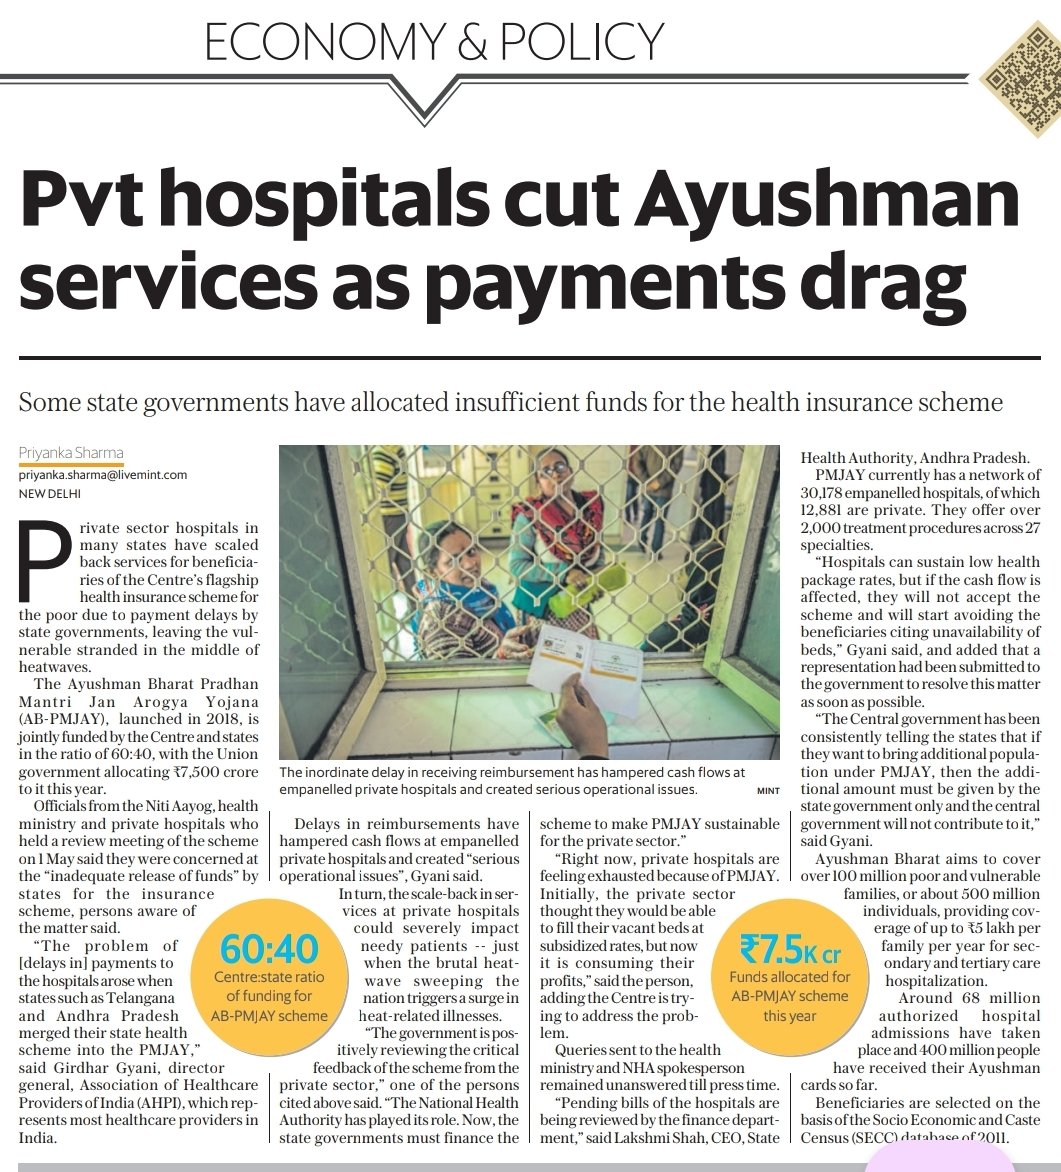 'Delay in reimbursement payments have hampered cash flows at private #hospitals empanelled under #AyushmanBharat PM-JAY scheme & created serious operational issues'- Association of Healthcare Providers of India (AHPI) @ahpi_india DG Dr. Gyani MOHFW, NITI Aayog reviewed…